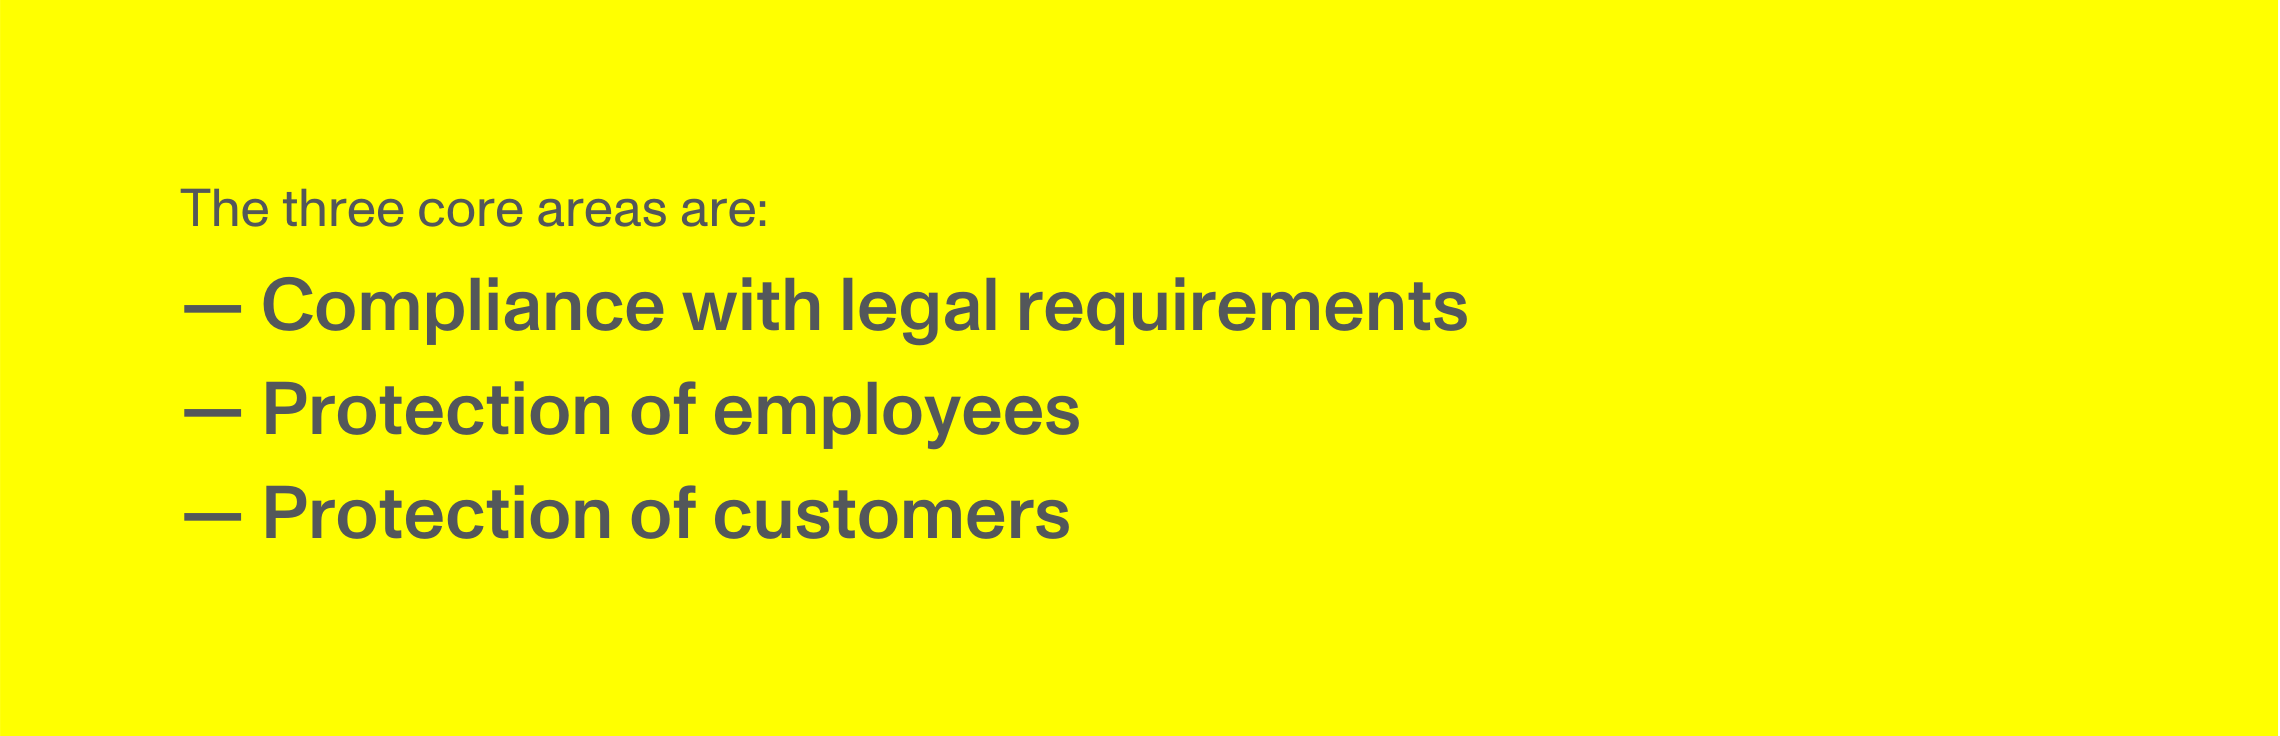 The three core areas: Compliance with legal requirements, protection of employees, protection of customers